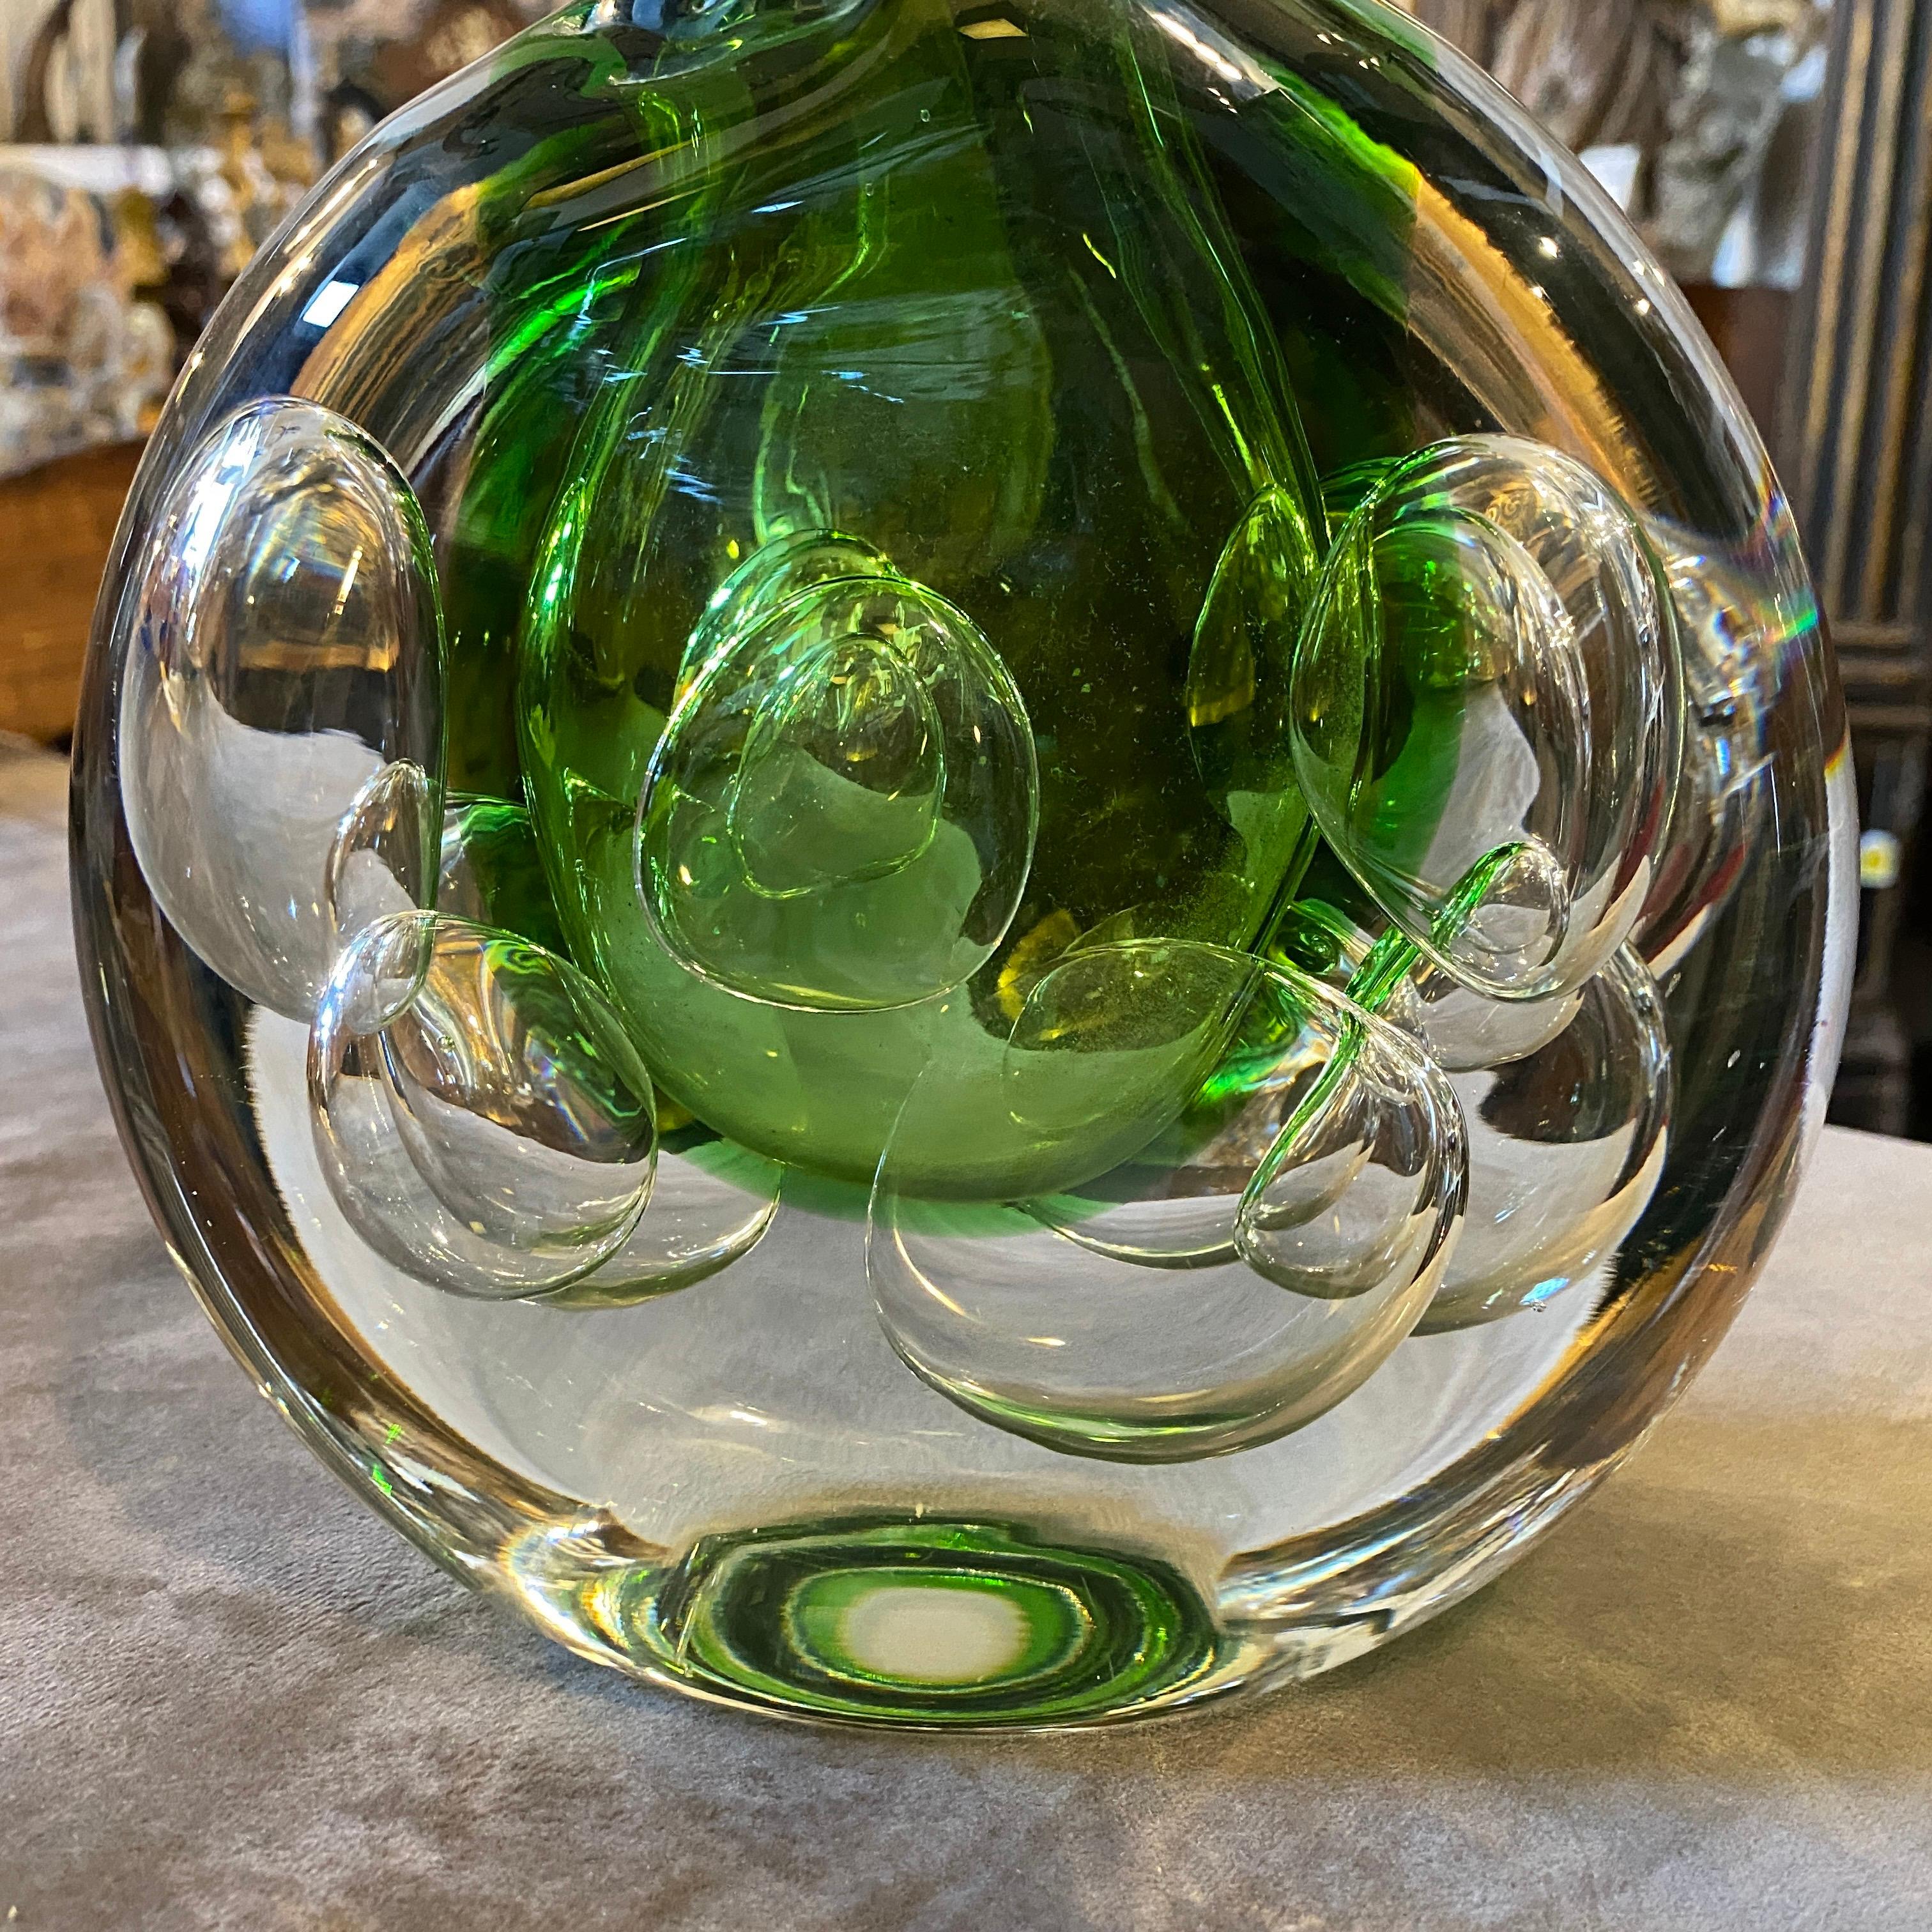 A stylish vase designed by Jaroslav Svoboda, heavy green sommerso glass it's in perfect conditions. The Sommerso technique is a popular glassblowing method that originated in Murano, Italy, in the late 1930s. However, it was later adopted and